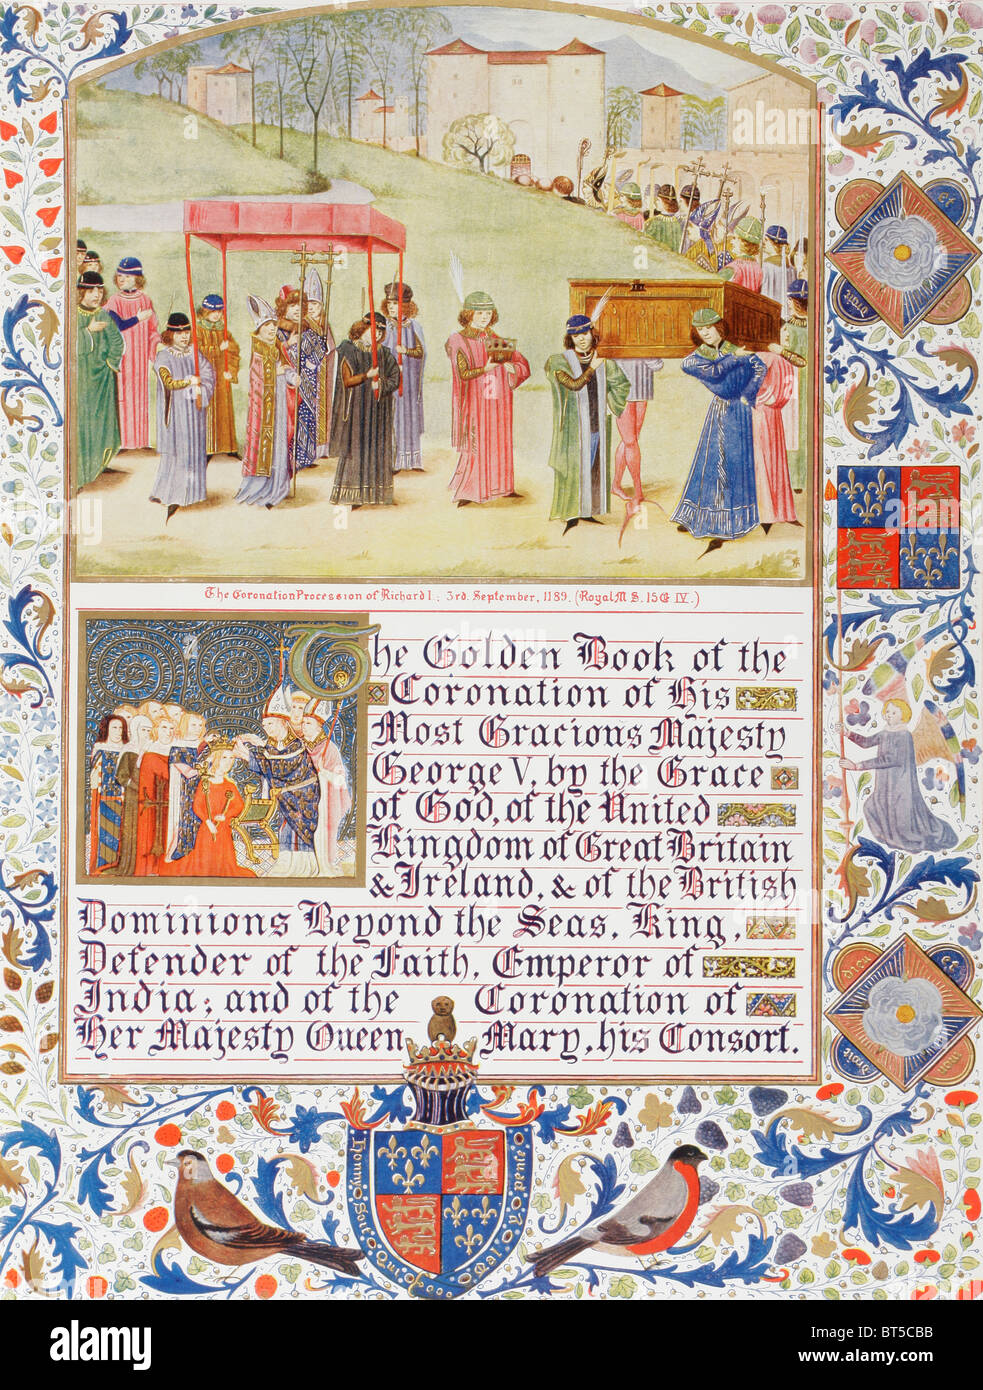 Decorative page from The Golden Book of the Coronation of King George V and his consort Queen Mary. Stock Photo